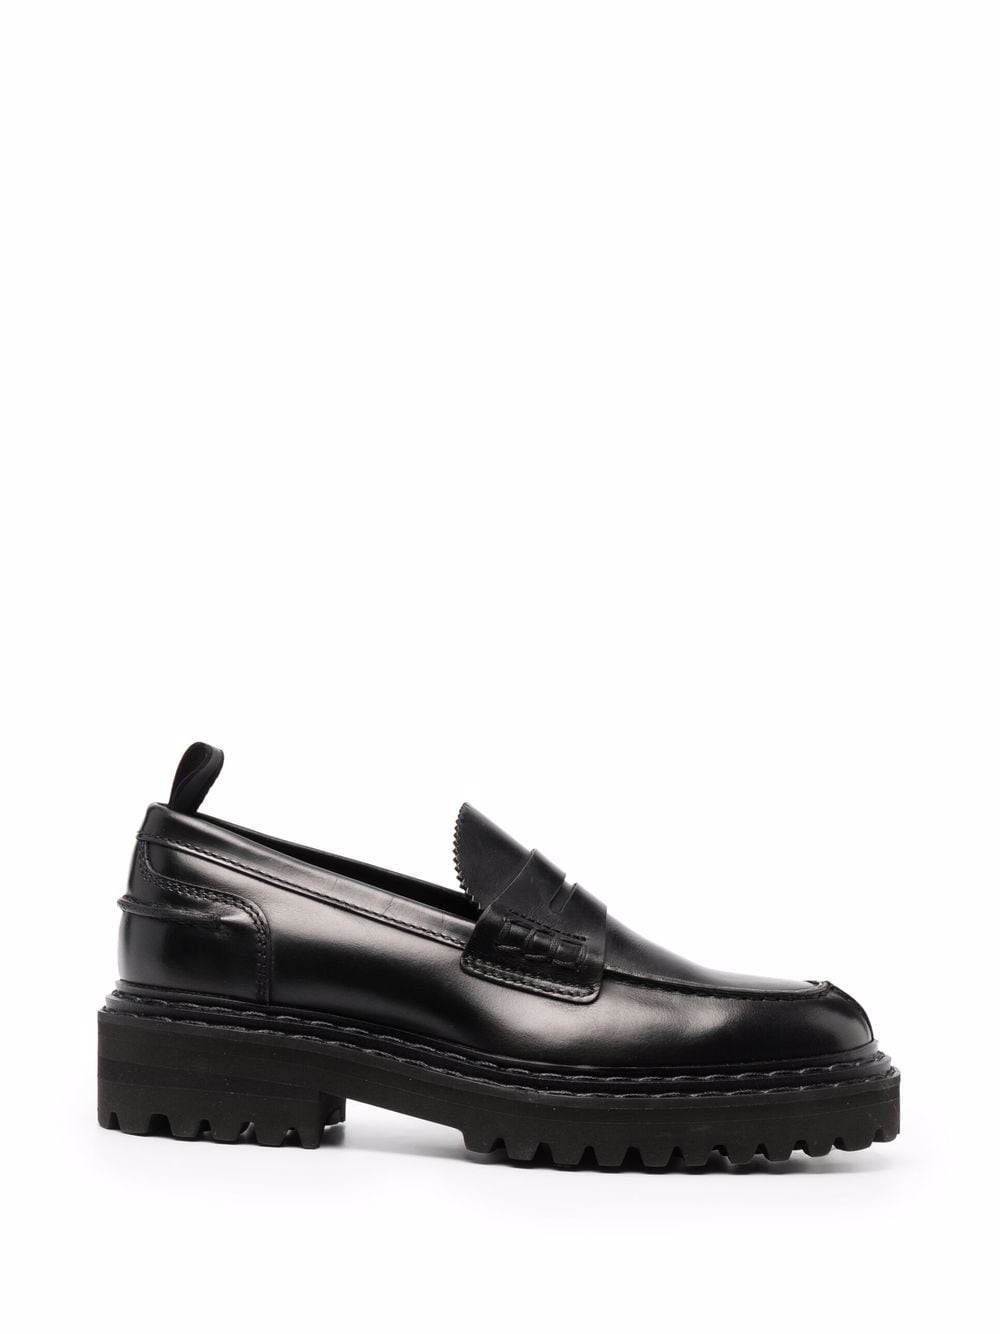 Officine Creative leather slip-on loafers